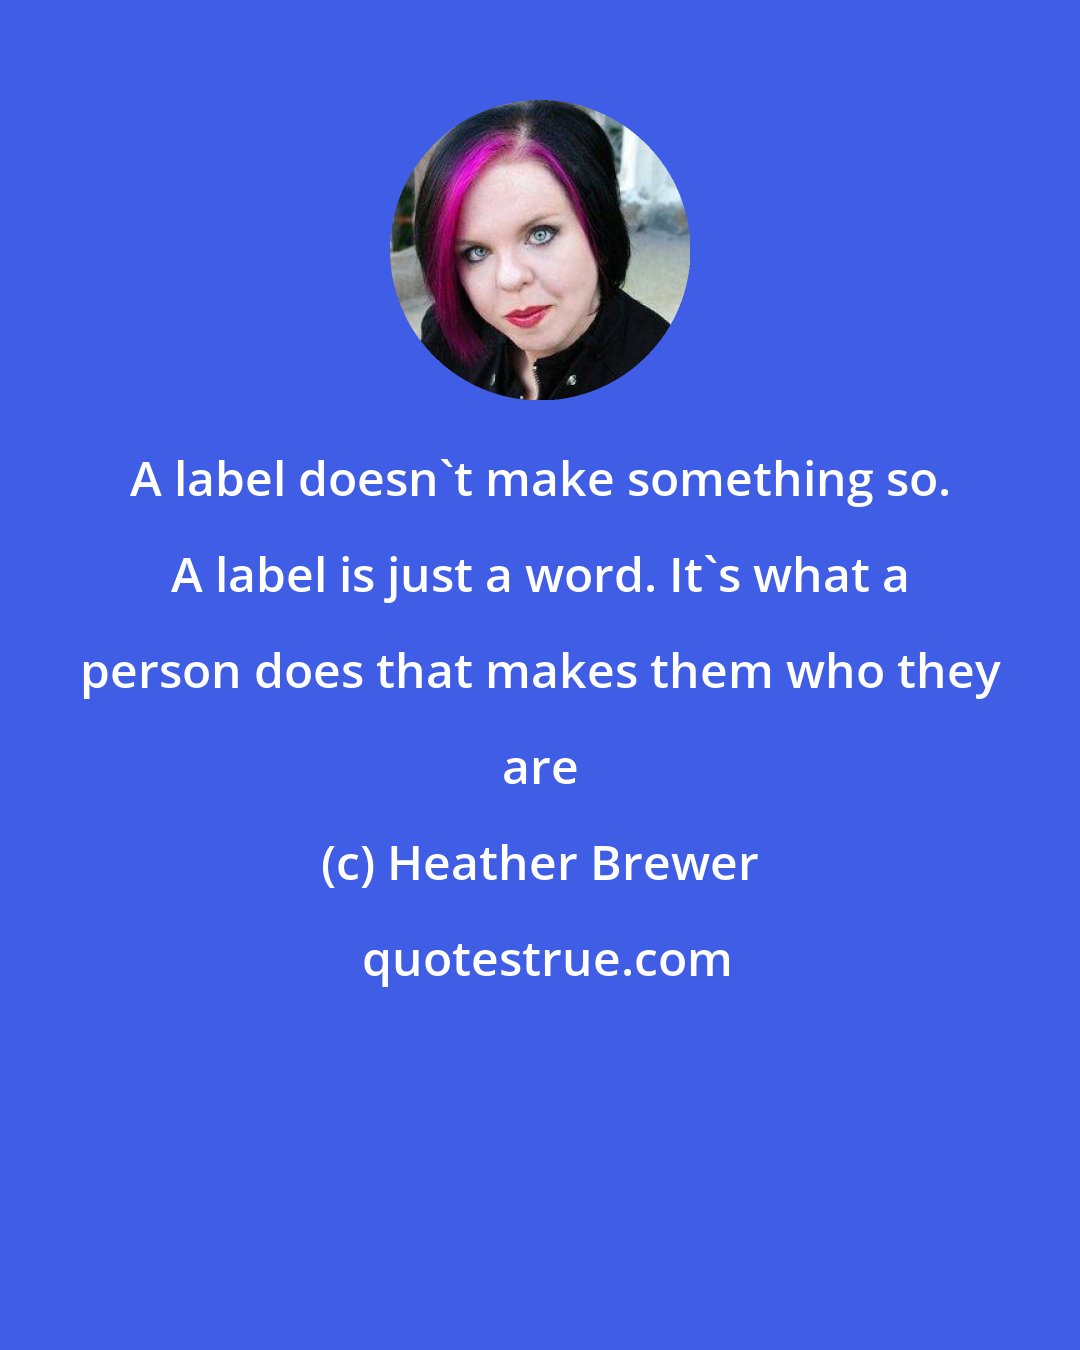 Heather Brewer: A label doesn't make something so. A label is just a word. It's what a person does that makes them who they are